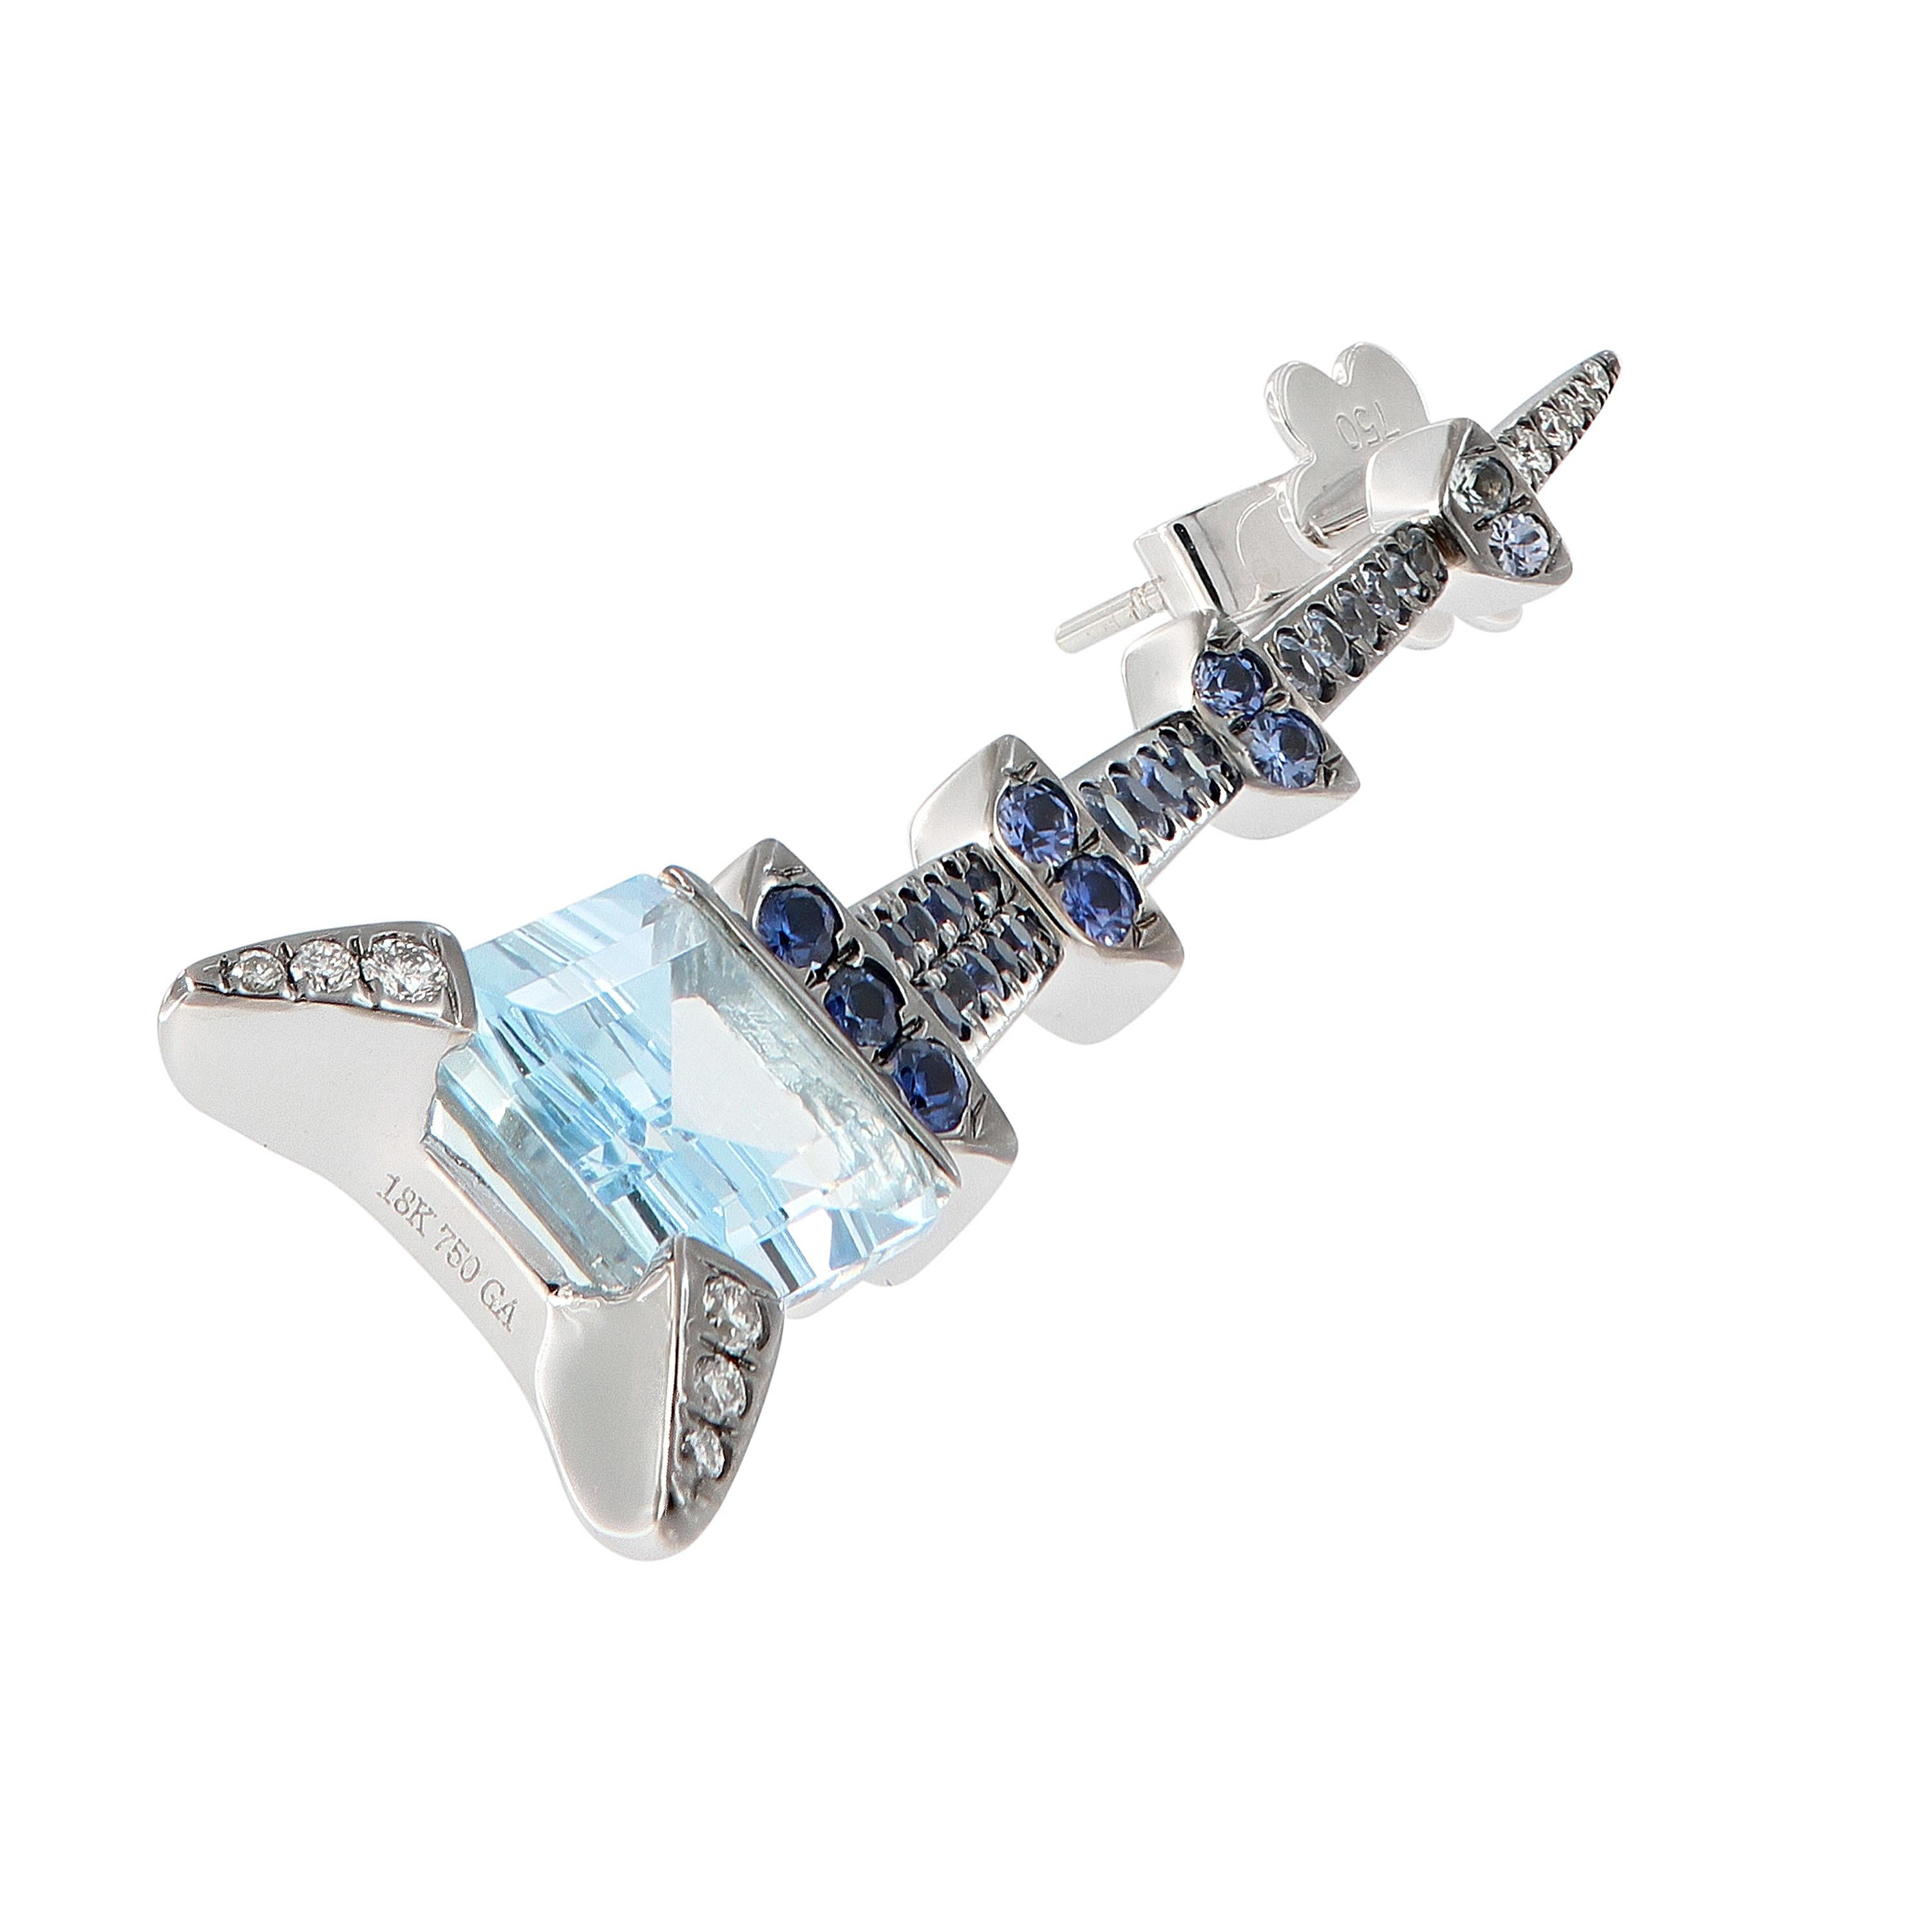 Dramatic long drop earrings in a contemporary Pagoda design. Earrings showcase two emerald cut aquamarines accented with blue sapphires and diamonds. Earrings crafted in 18k white gold and black rhodium plated. Weigh 13.2 grams. 70mm